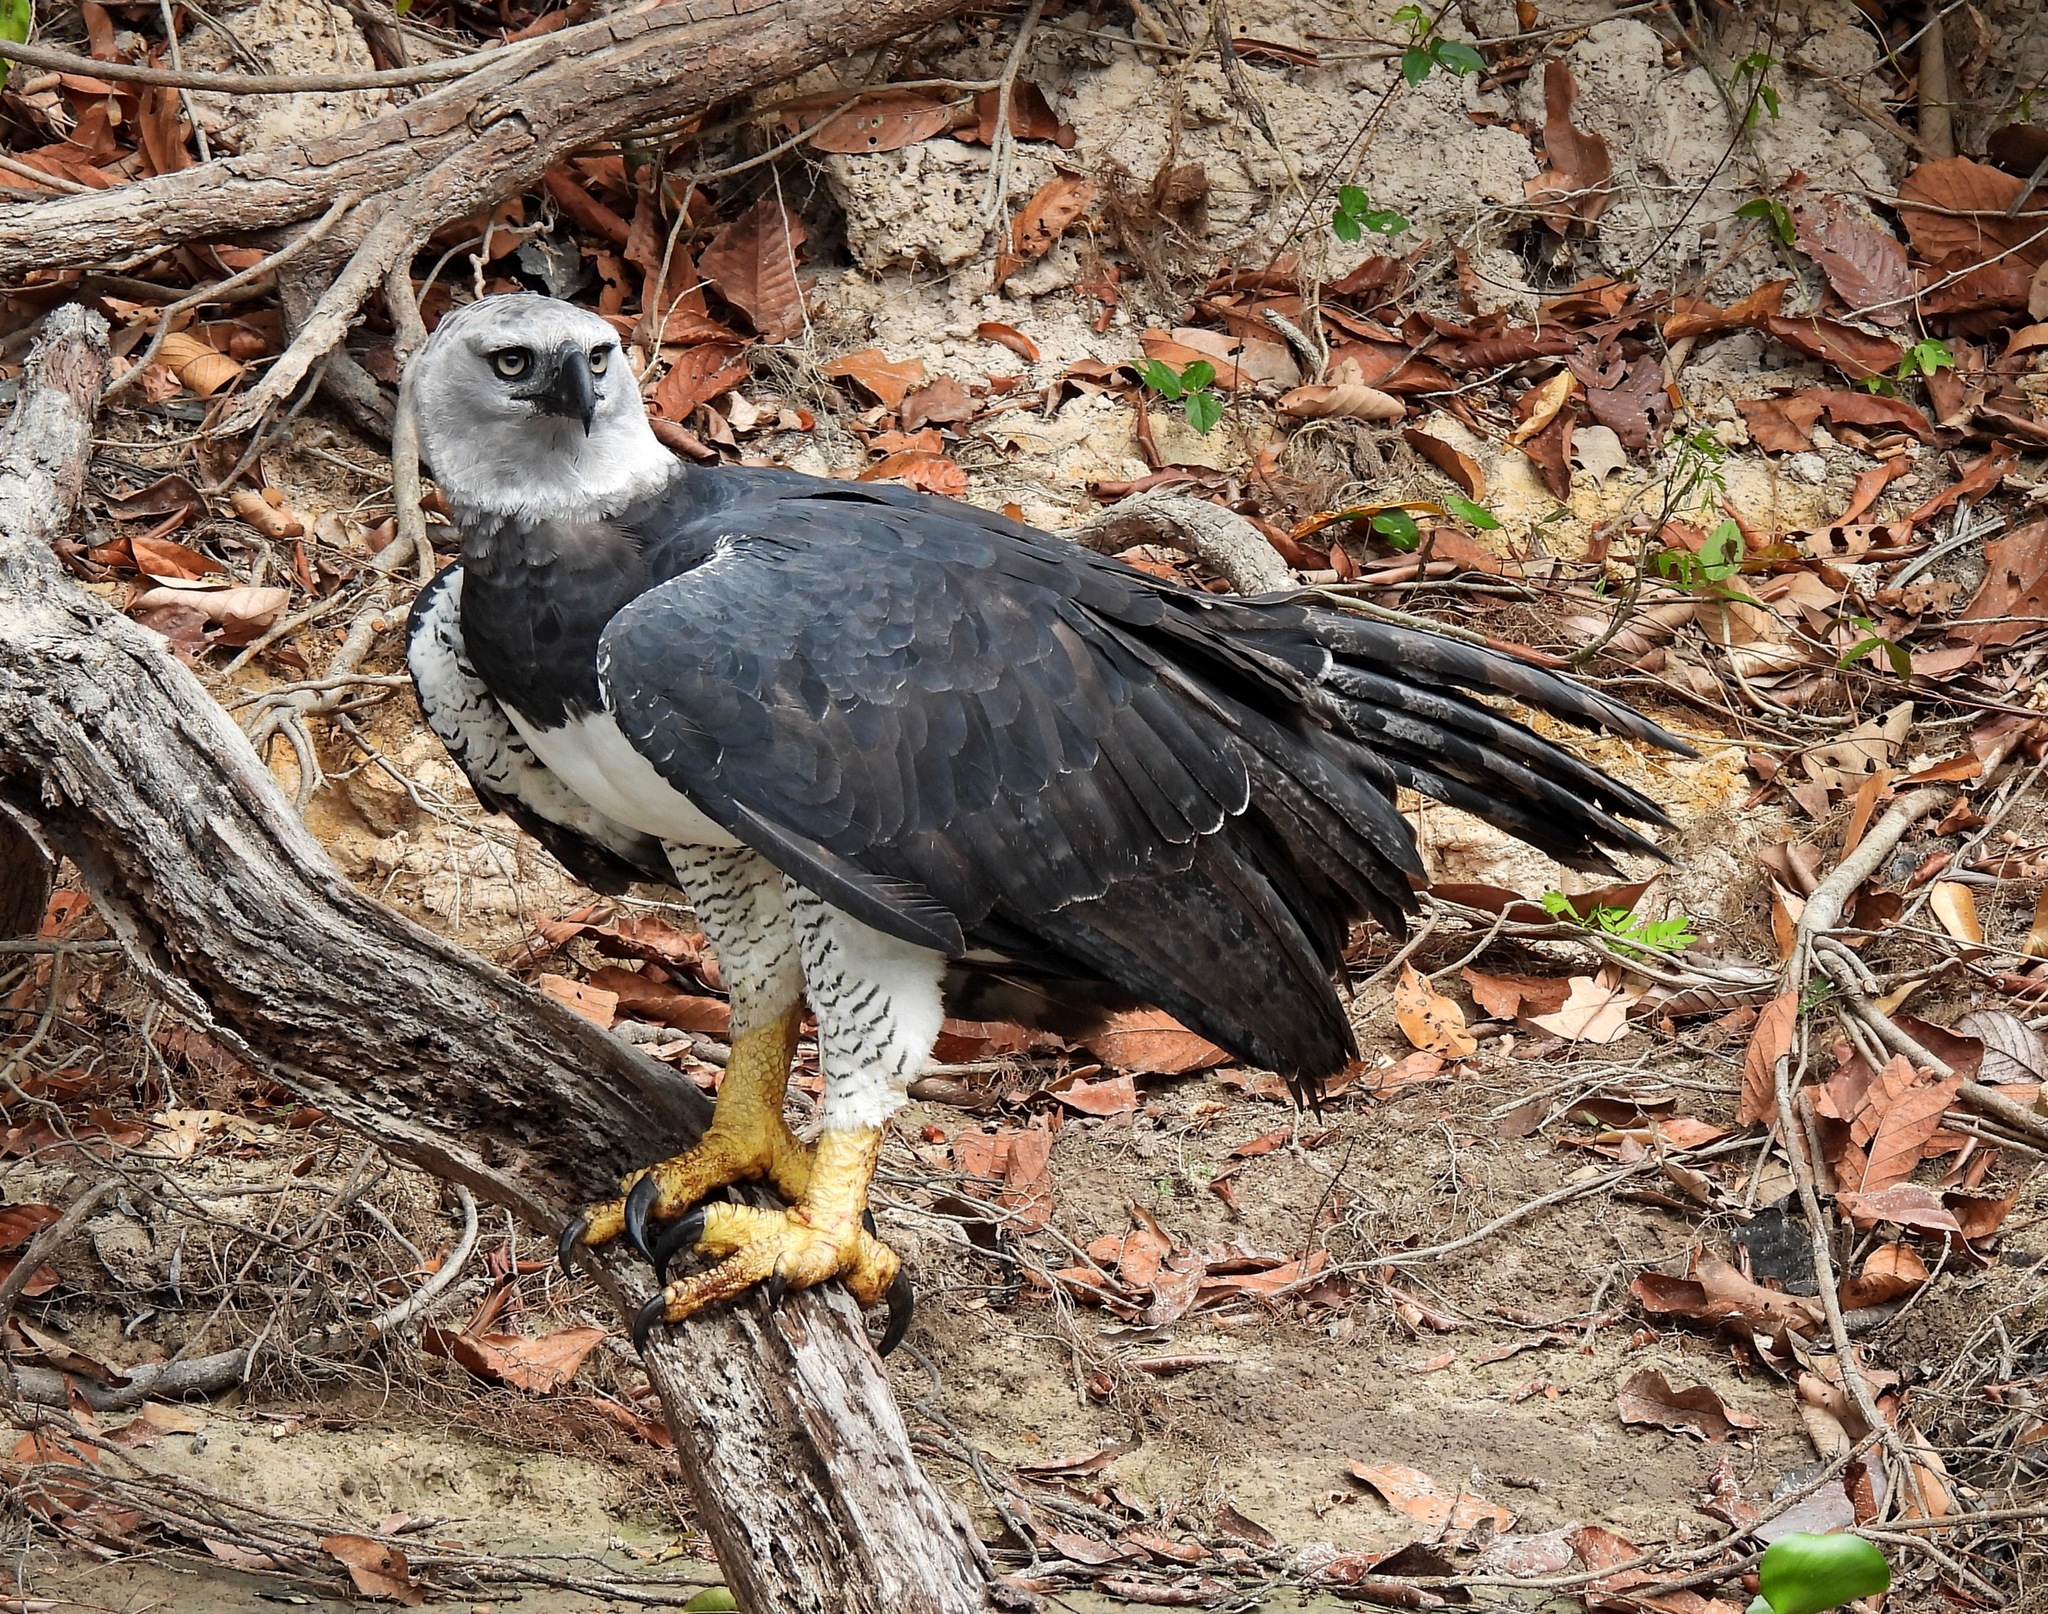 The Harpy Eagle the largest and most powerful raptor found in the